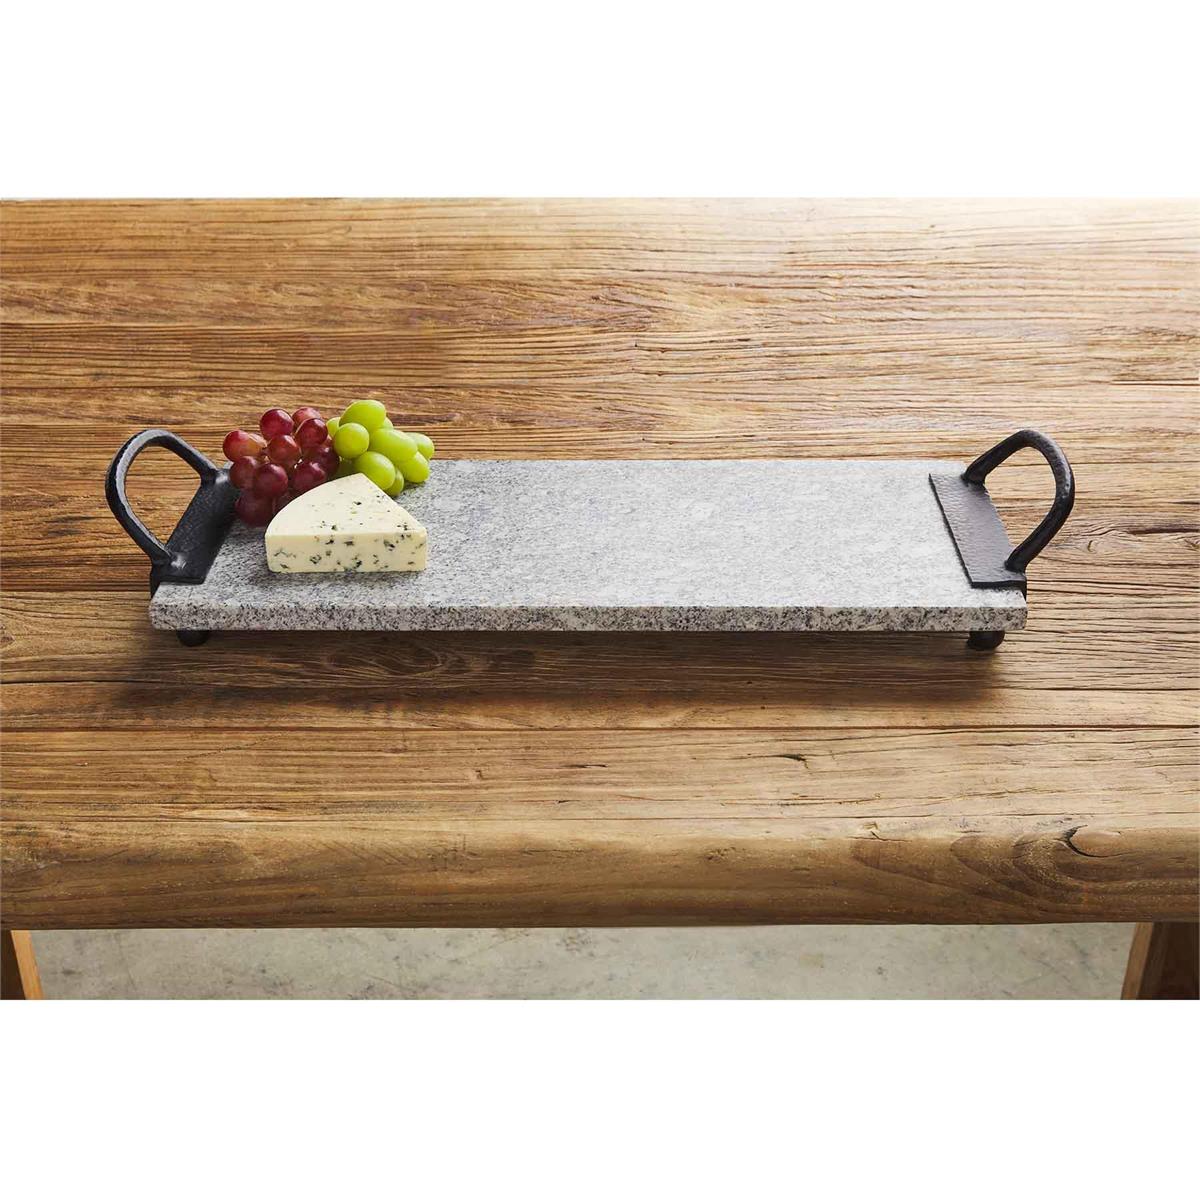 granite handle board displayed on a rustic wood table with purple and green grapes and triangle block of cheese